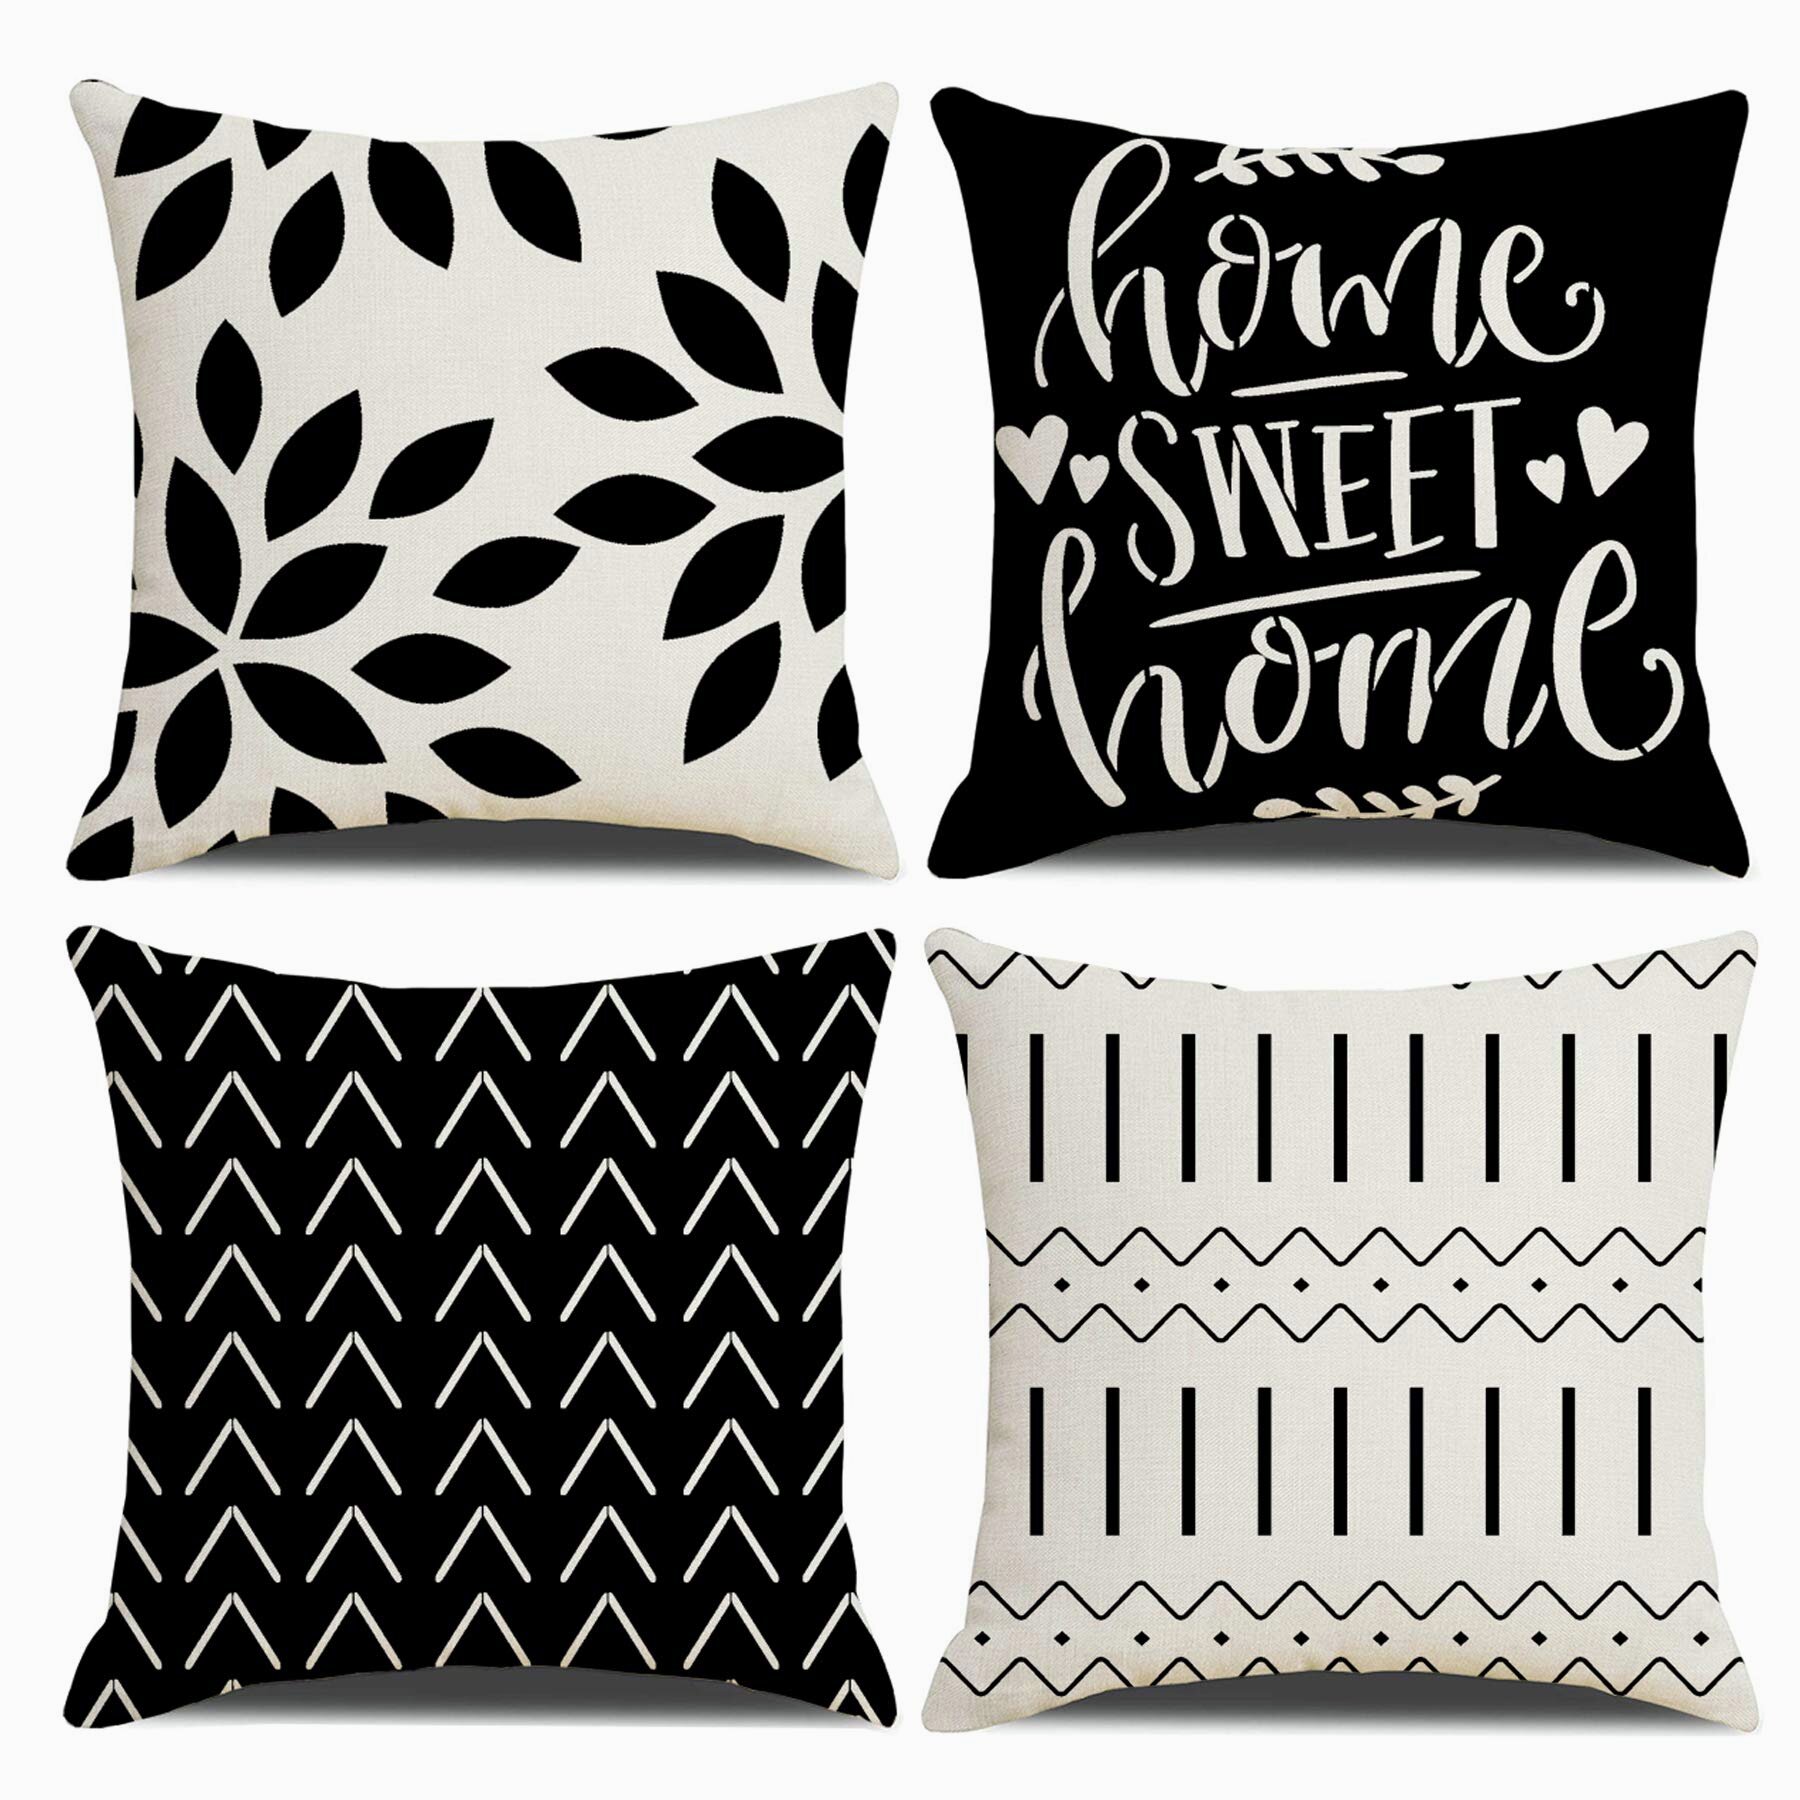 Pillow Covers 18x18 Inch for Home Decor Set of 4 